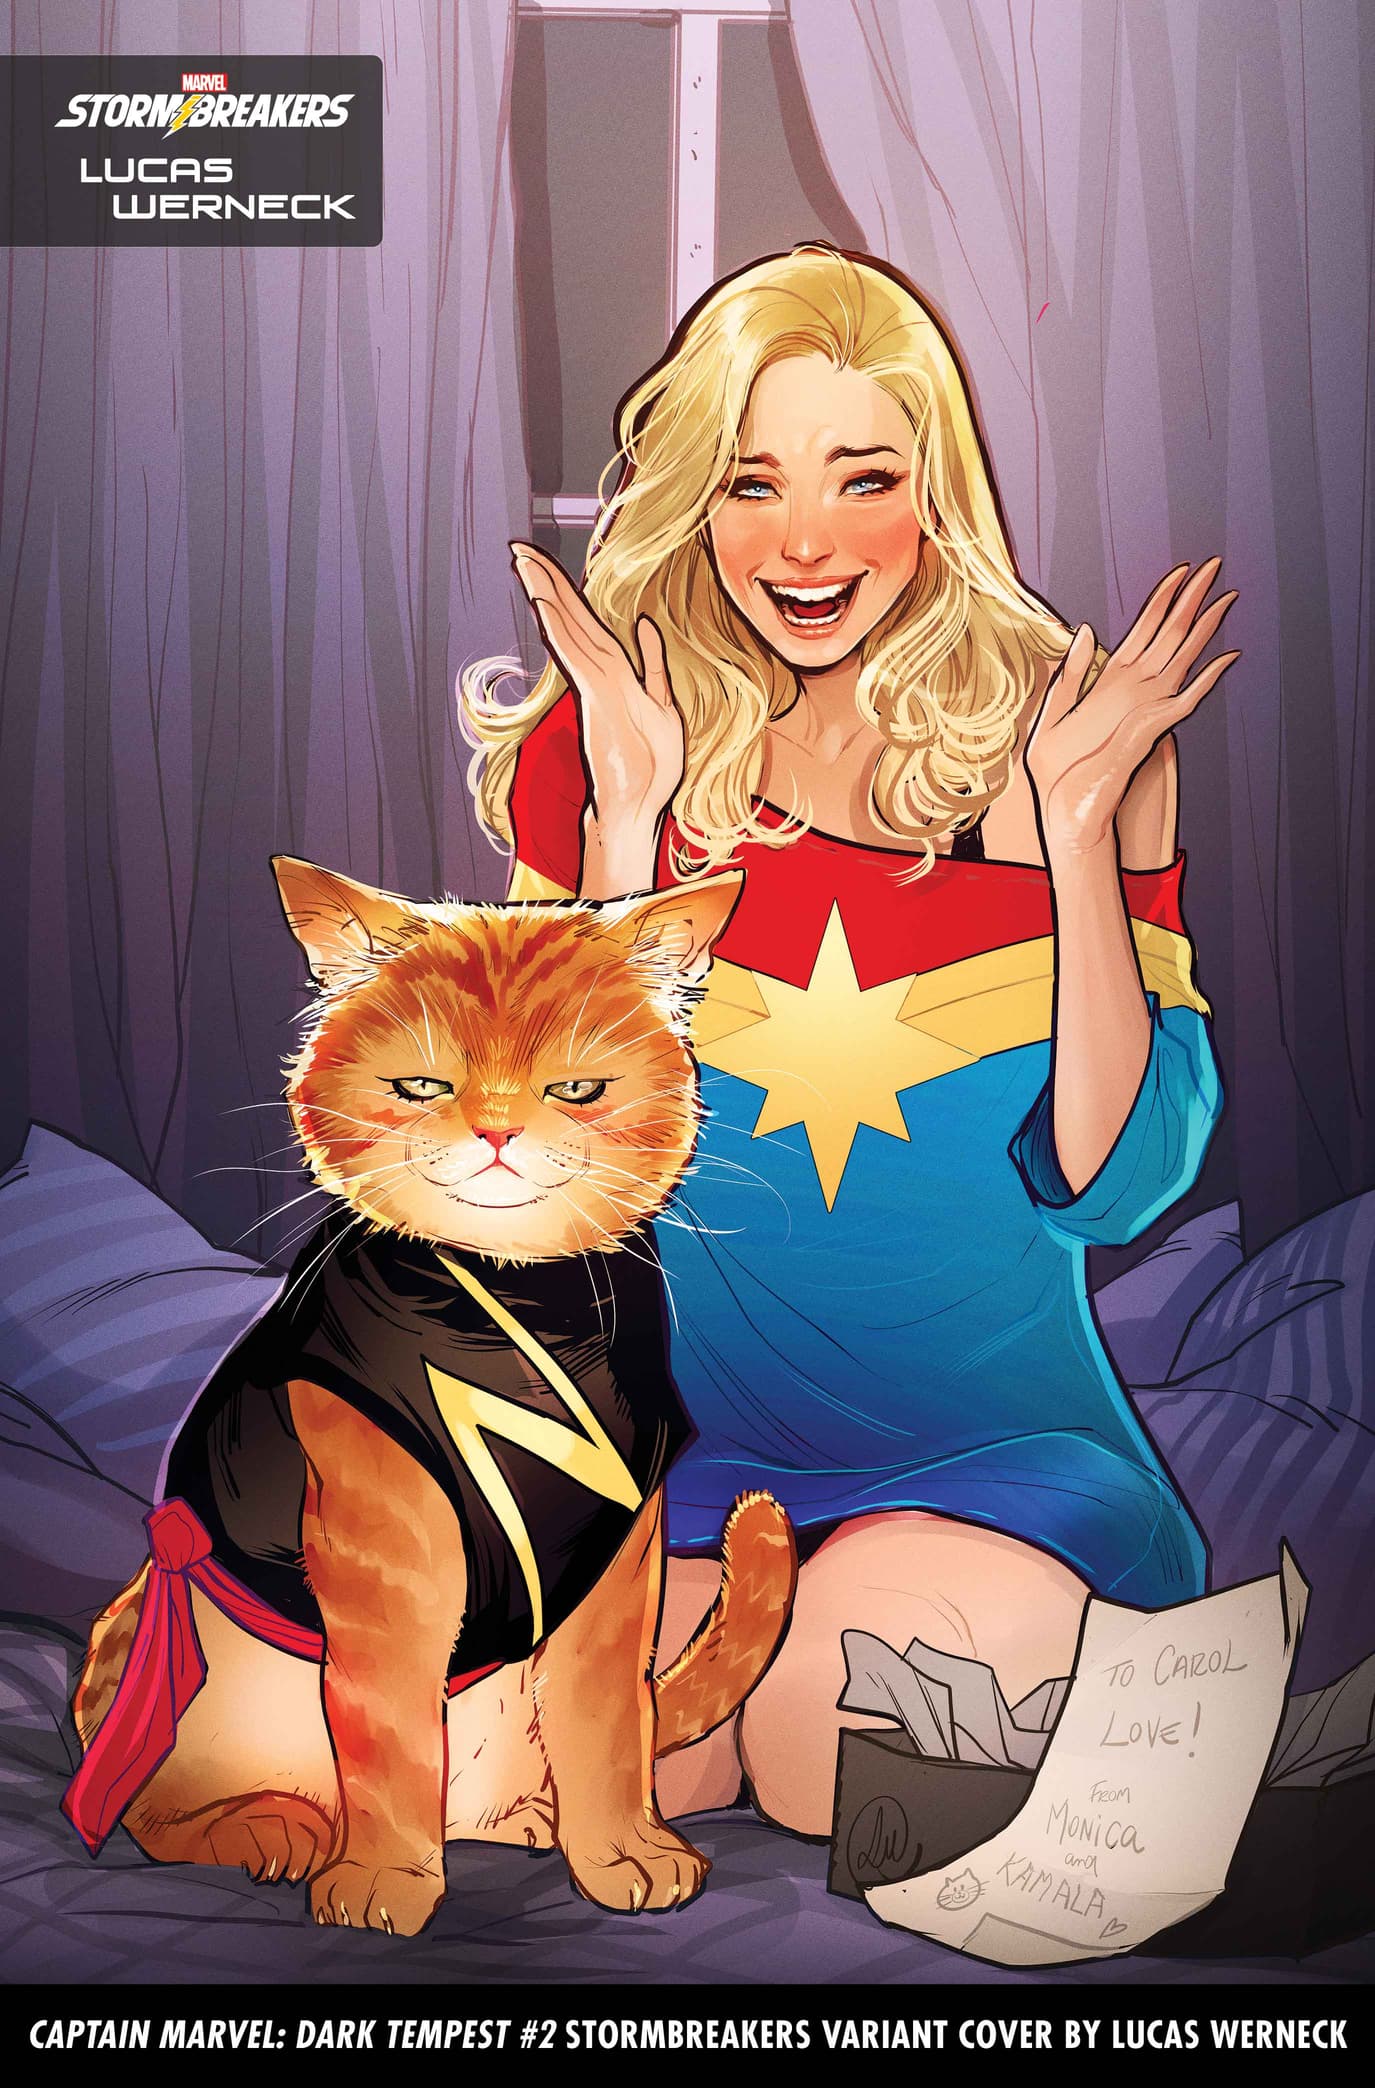 CAPTAIN MARVEL: DARK TEMPEST #2 Stormbreakers Variant Cover by Lucas Werneck